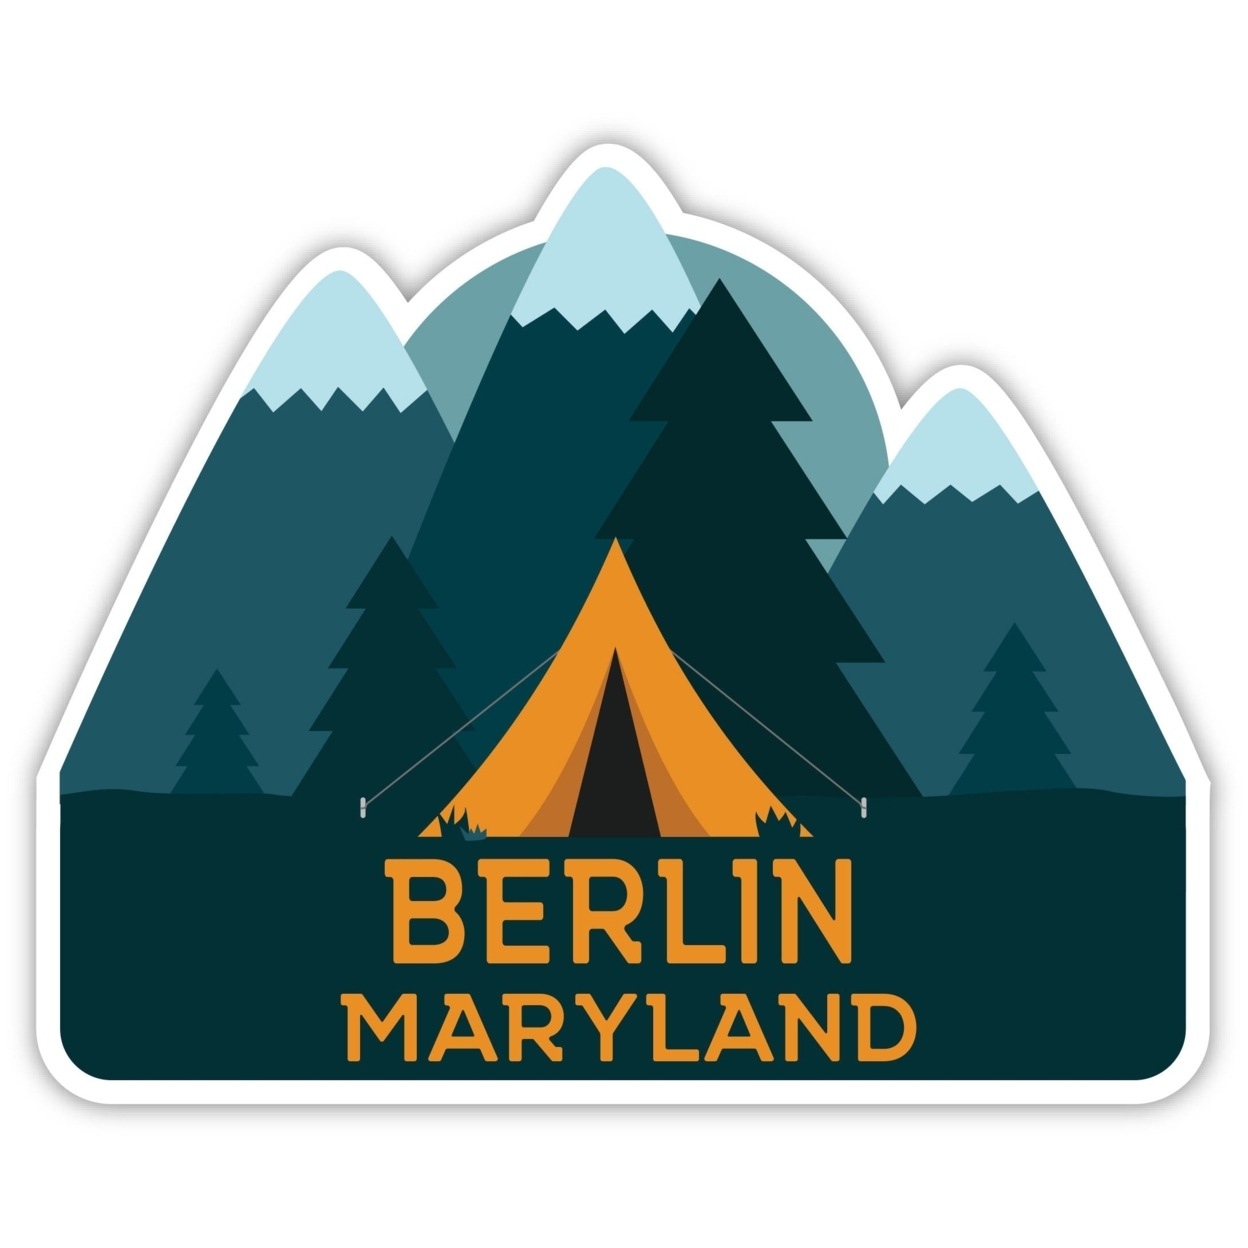 Berlin Maryland Souvenir Decorative Stickers (Choose Theme And Size) - Single Unit, 8-Inch, Tent